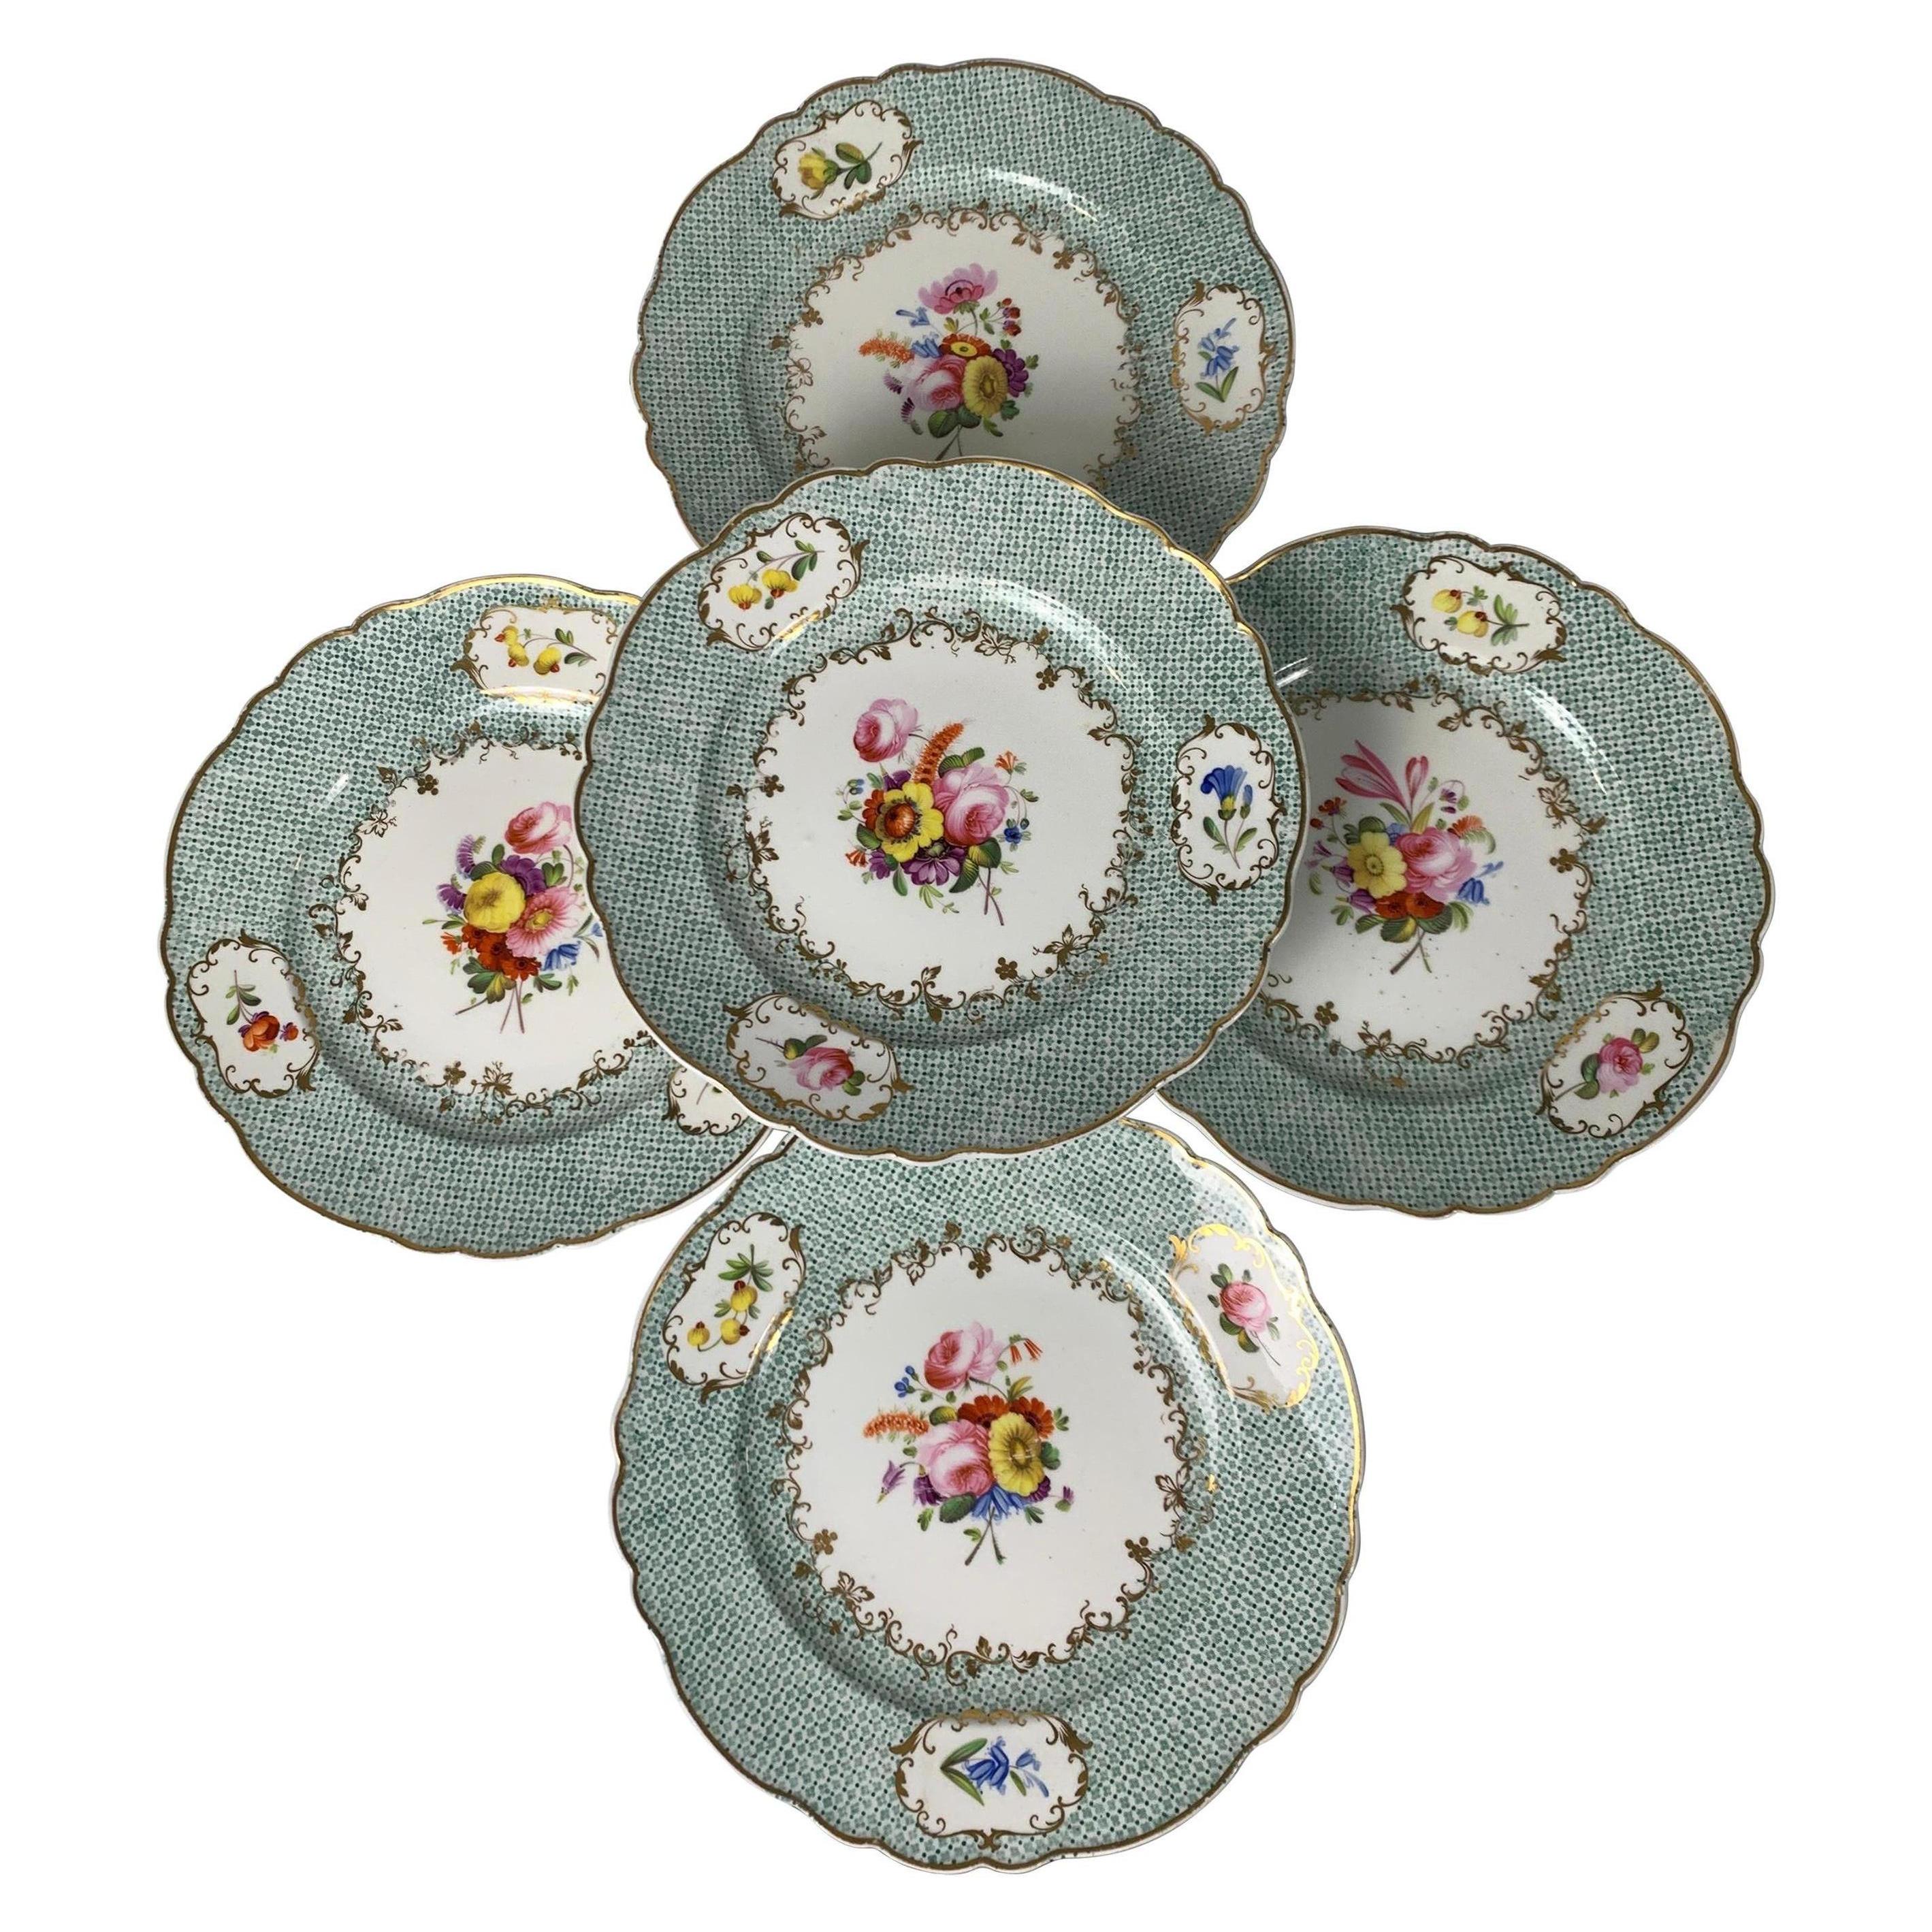 Set of Five Antique Porcelain Dishes Hand-Painted, England, Circa 1830